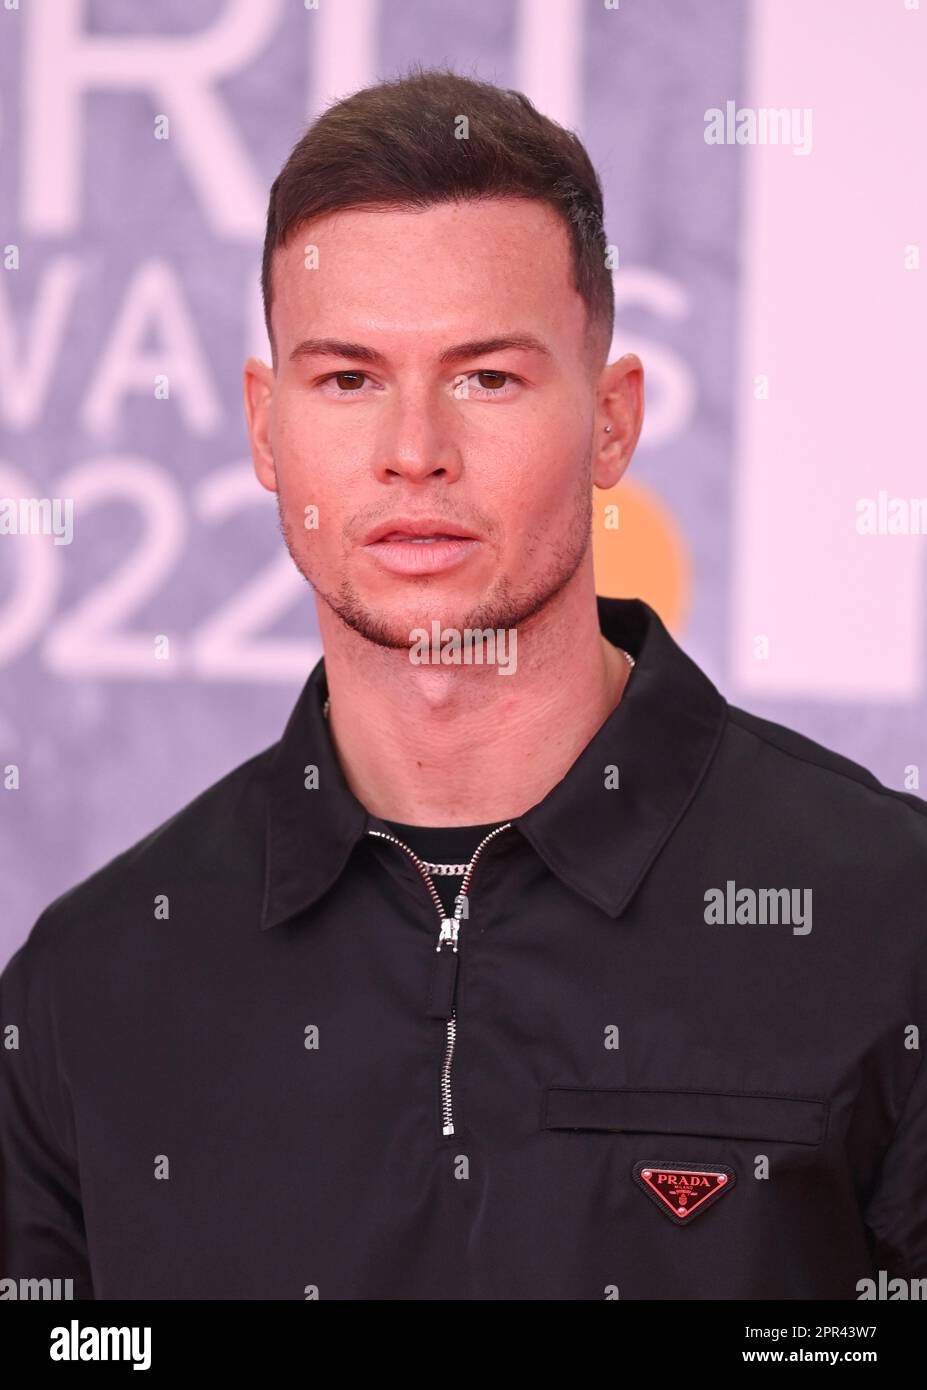 Photo Must Be Credited ©Alpha Press 079965 08/02/2022 Joel Corry at The BRIT Awards 2022 at The O2 Arena in London Stock Photo